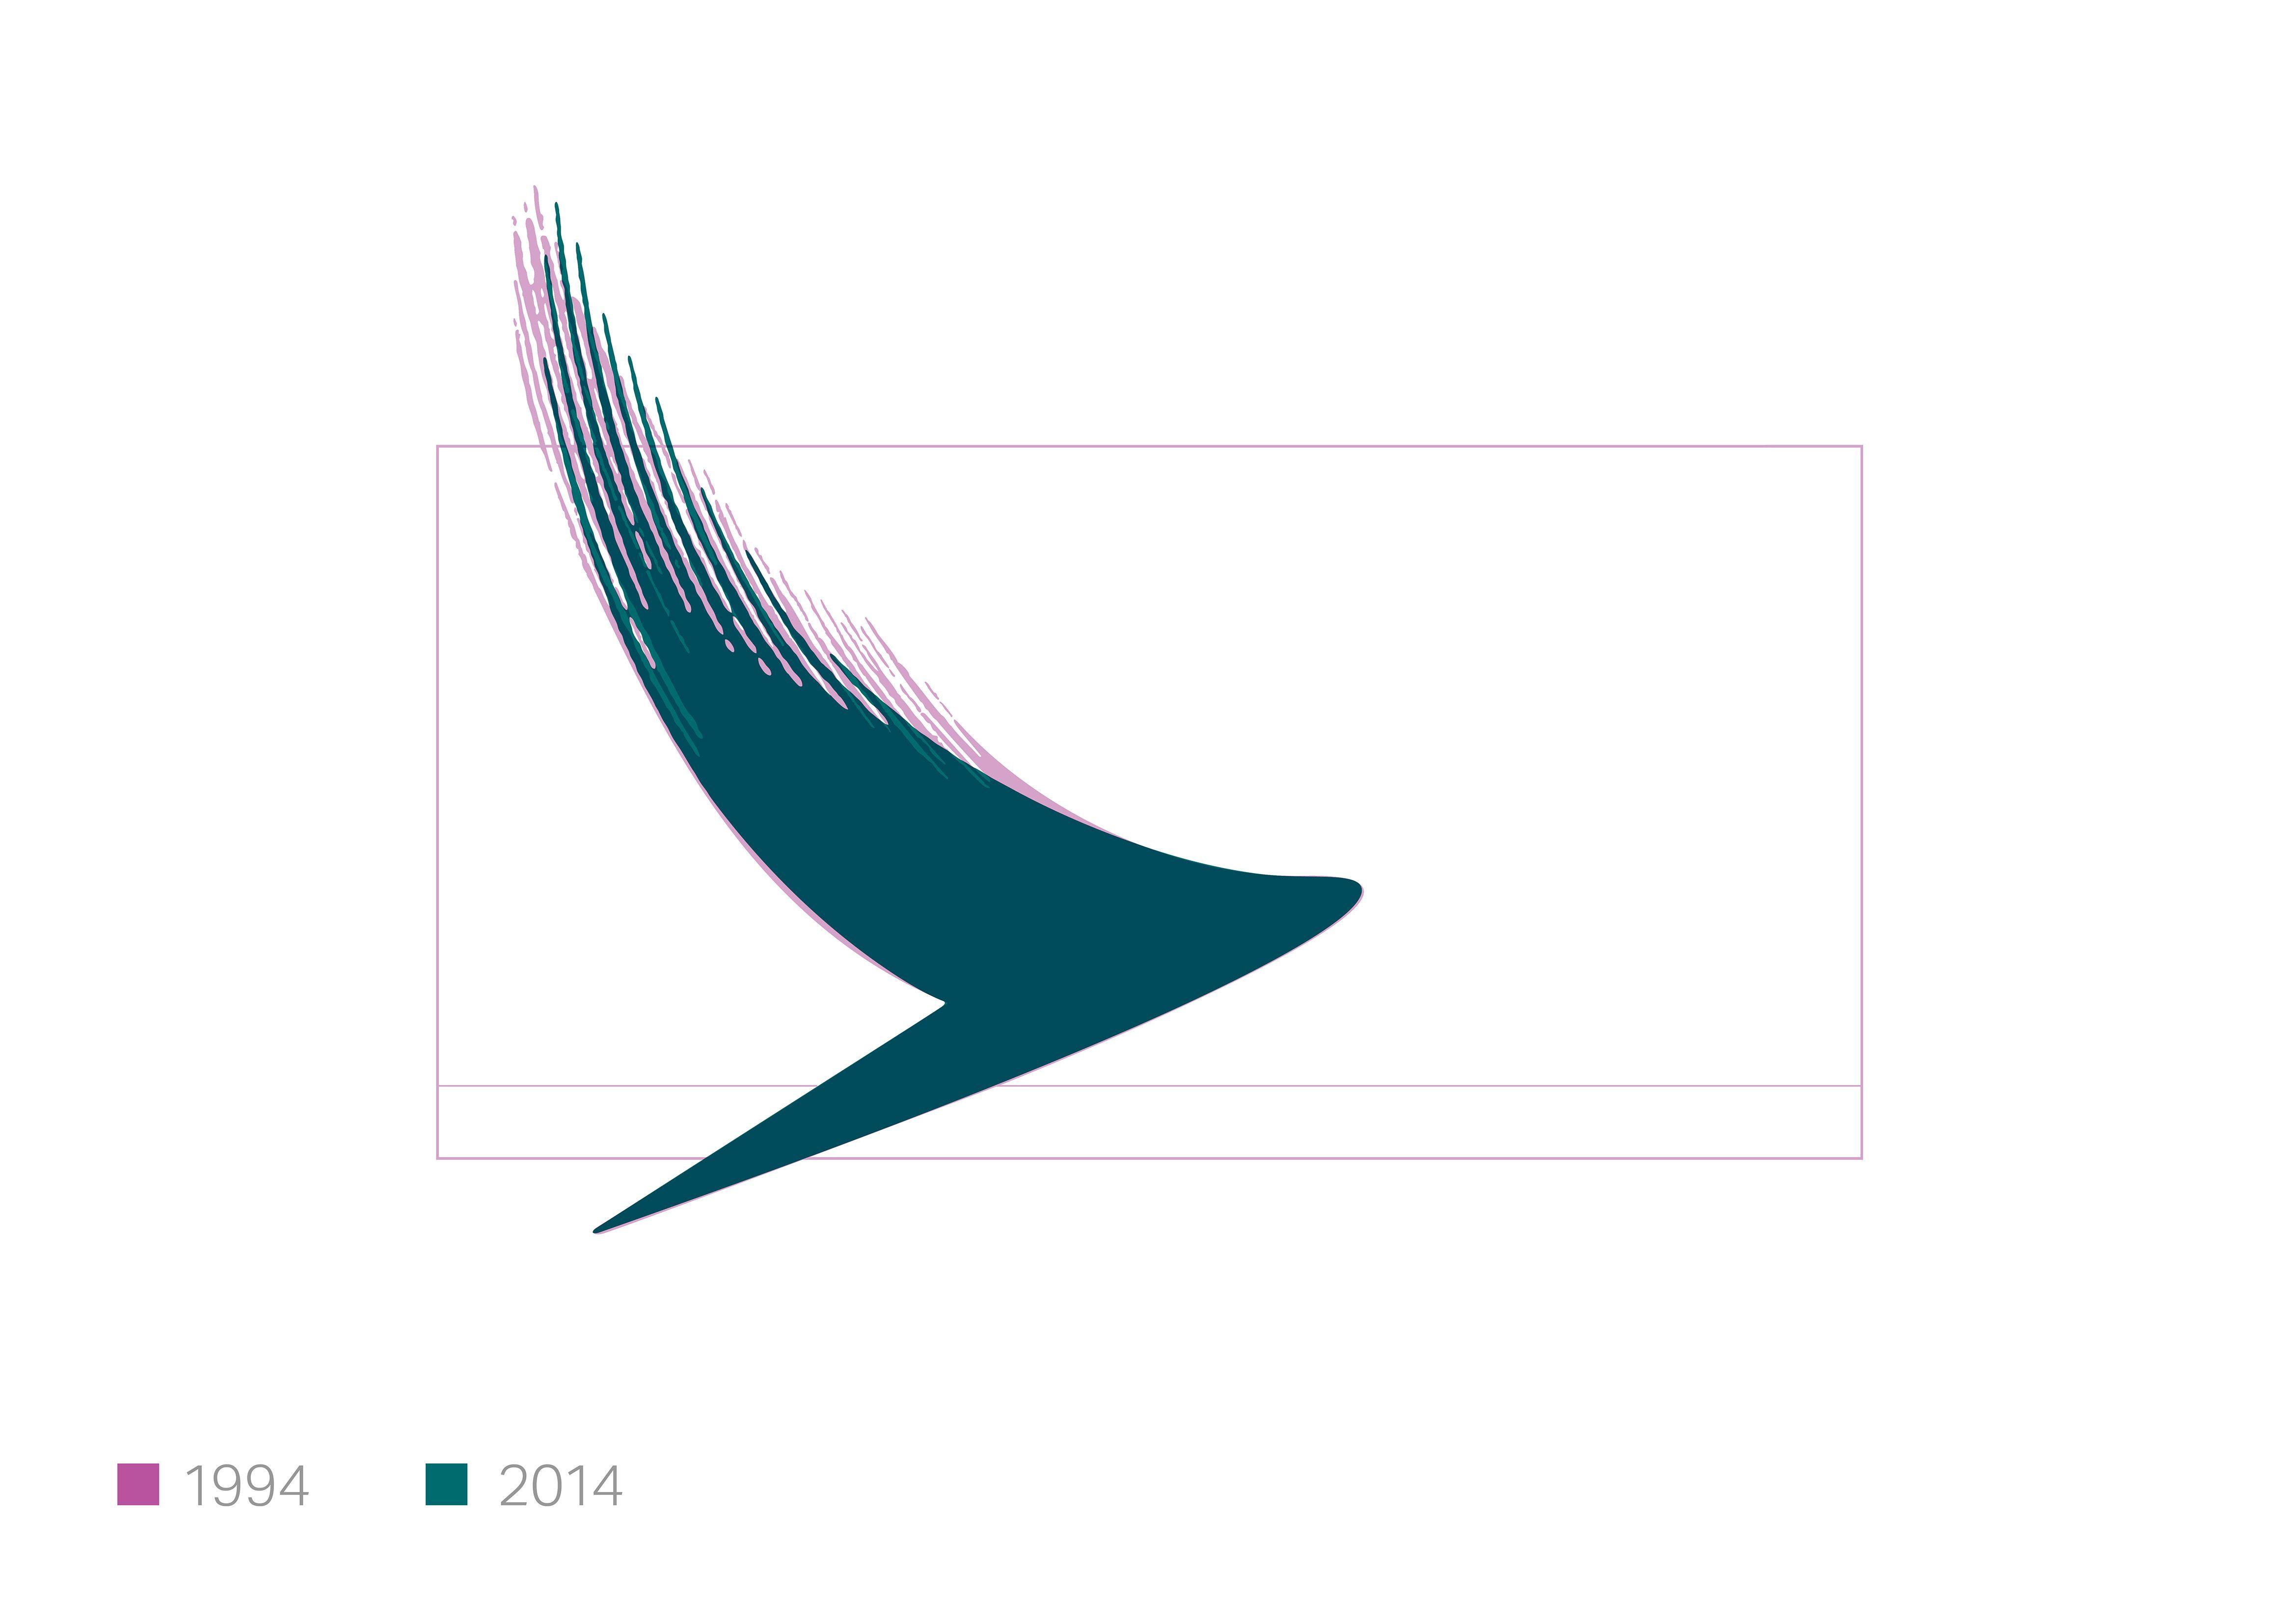 Cathay Pacific Logo - Cathay Pacific Relaunch Powerful Yet Simple New Brand Image ...